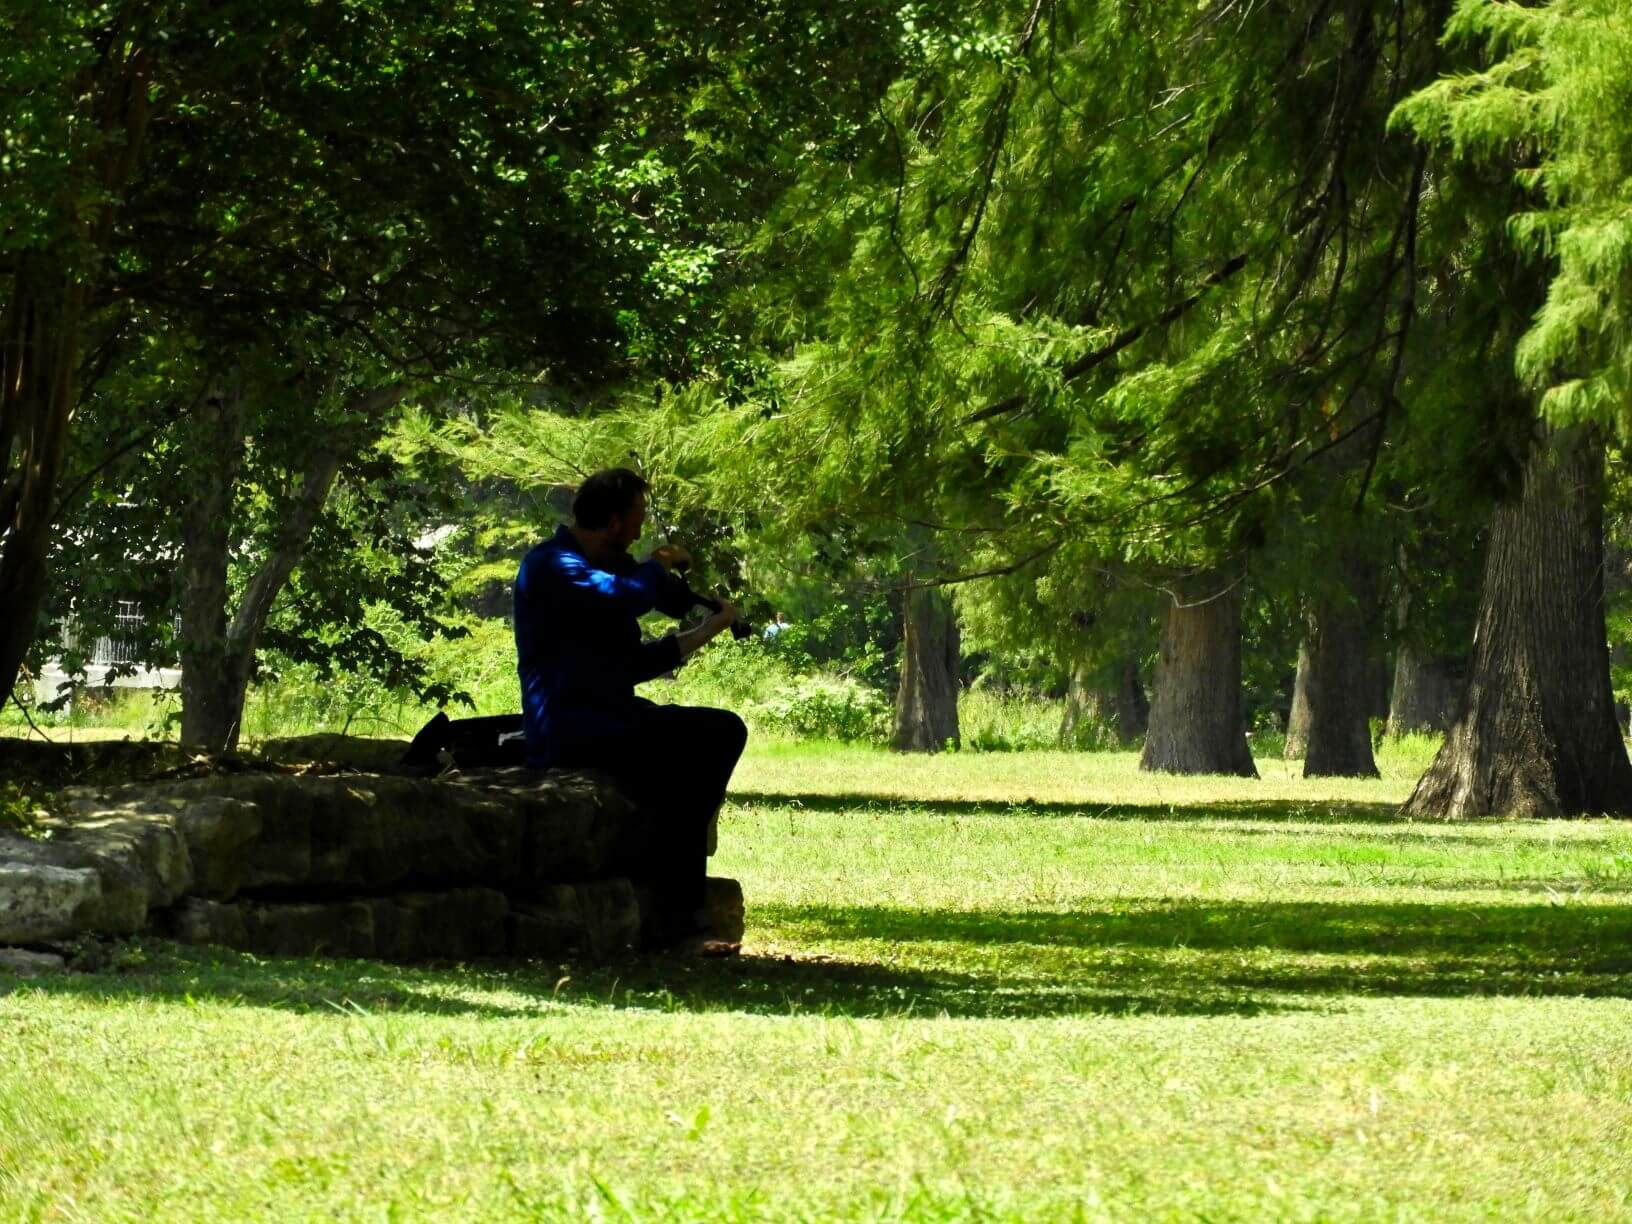 a man plays a violin in the park